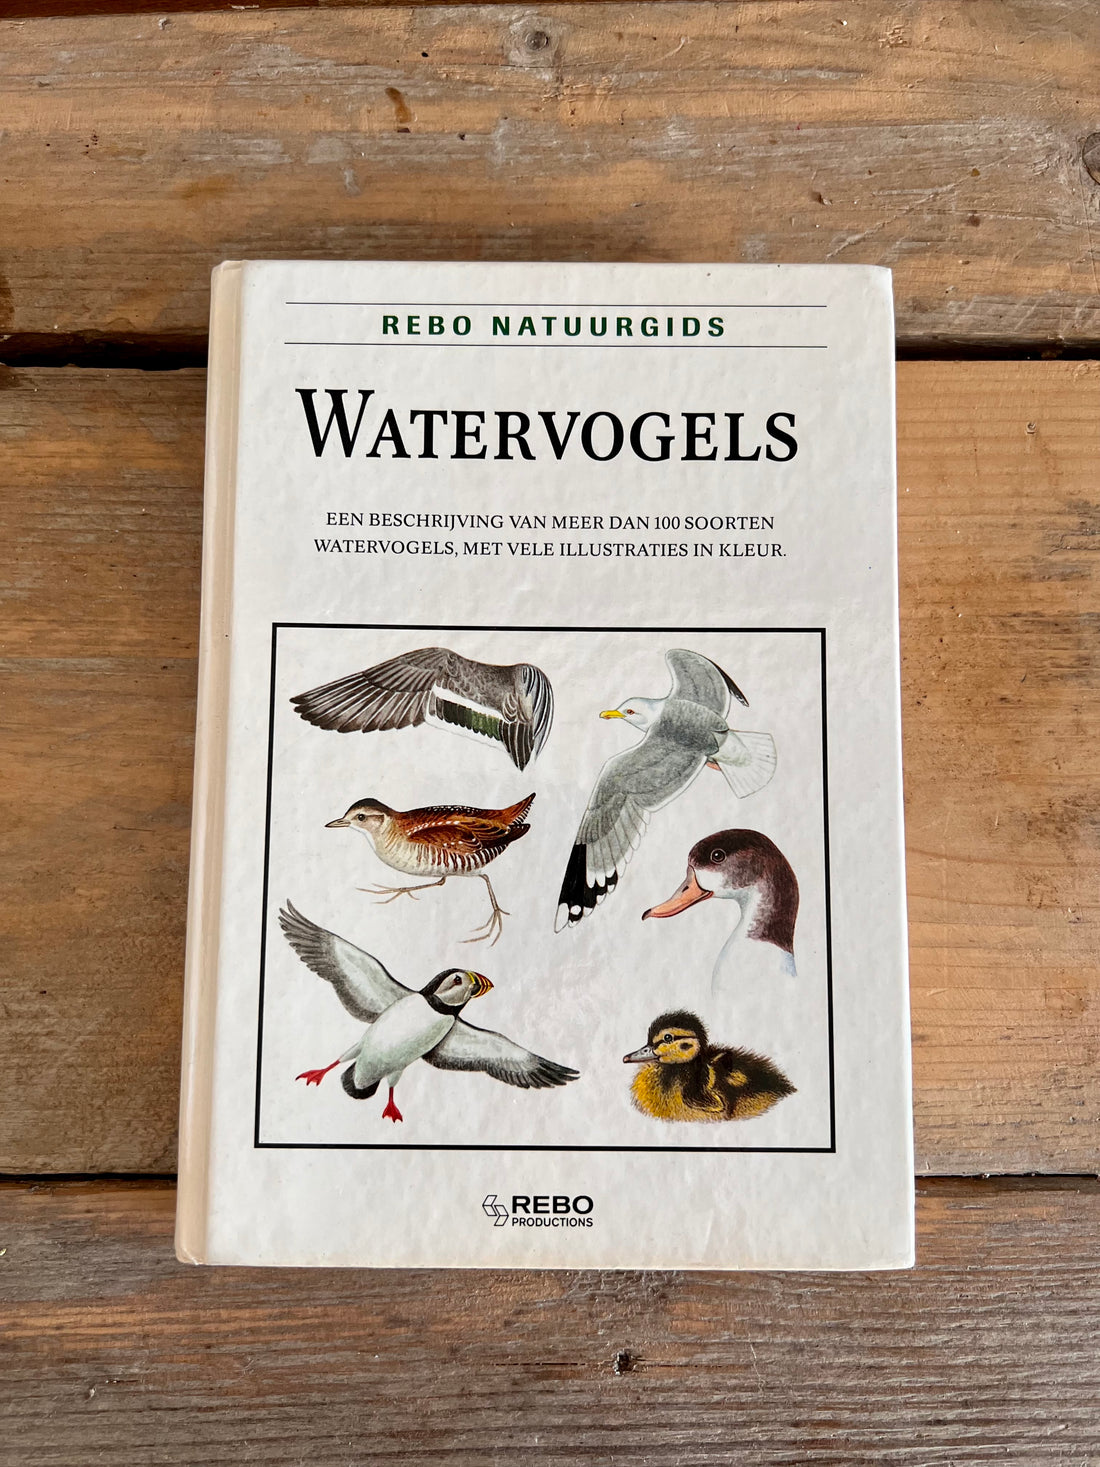 Nature guide waterfowl